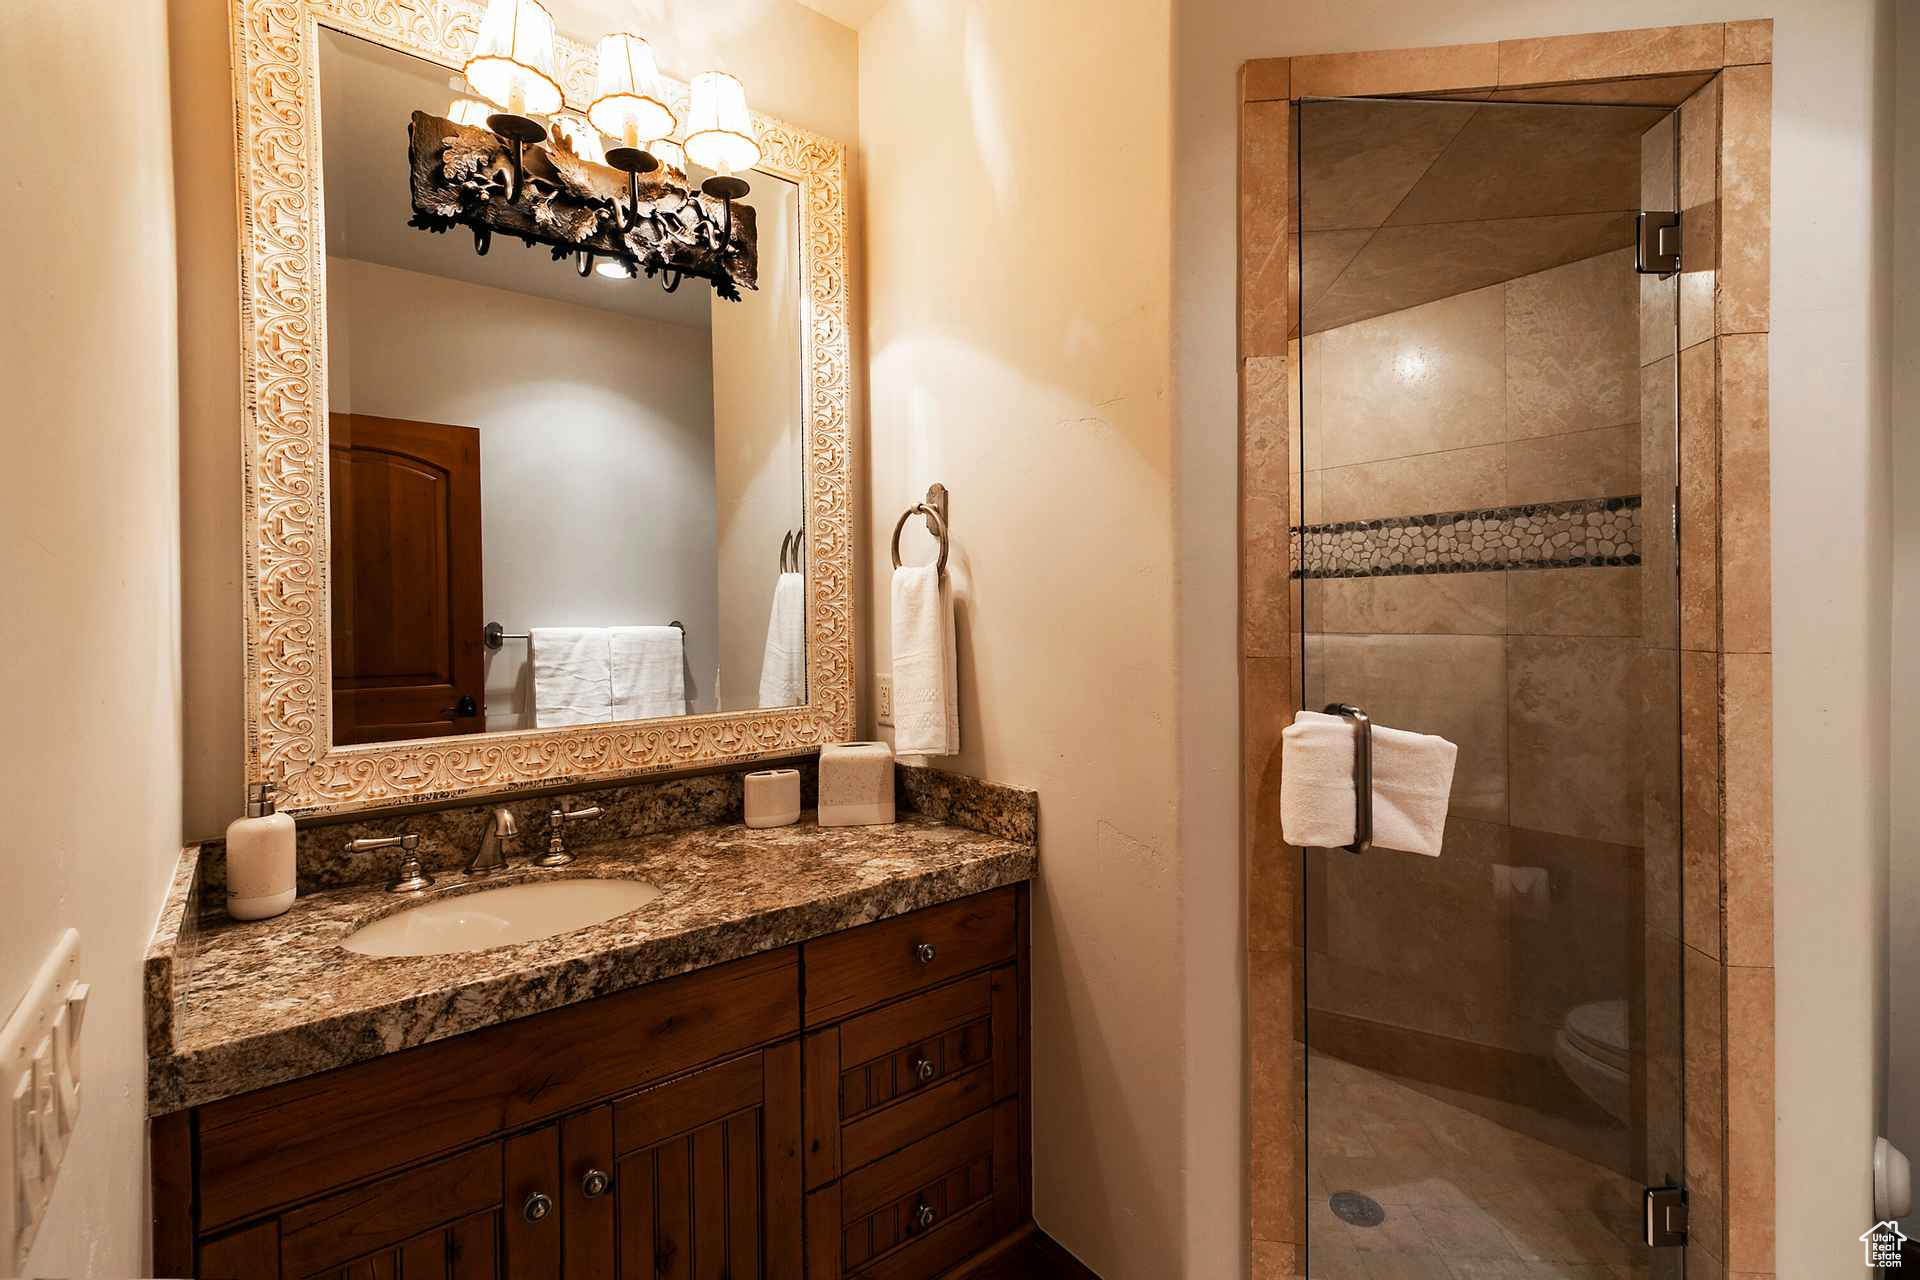 Bathroom with a shower with shower door, toilet, vanity with extensive cabinet space, and a notable chandelier